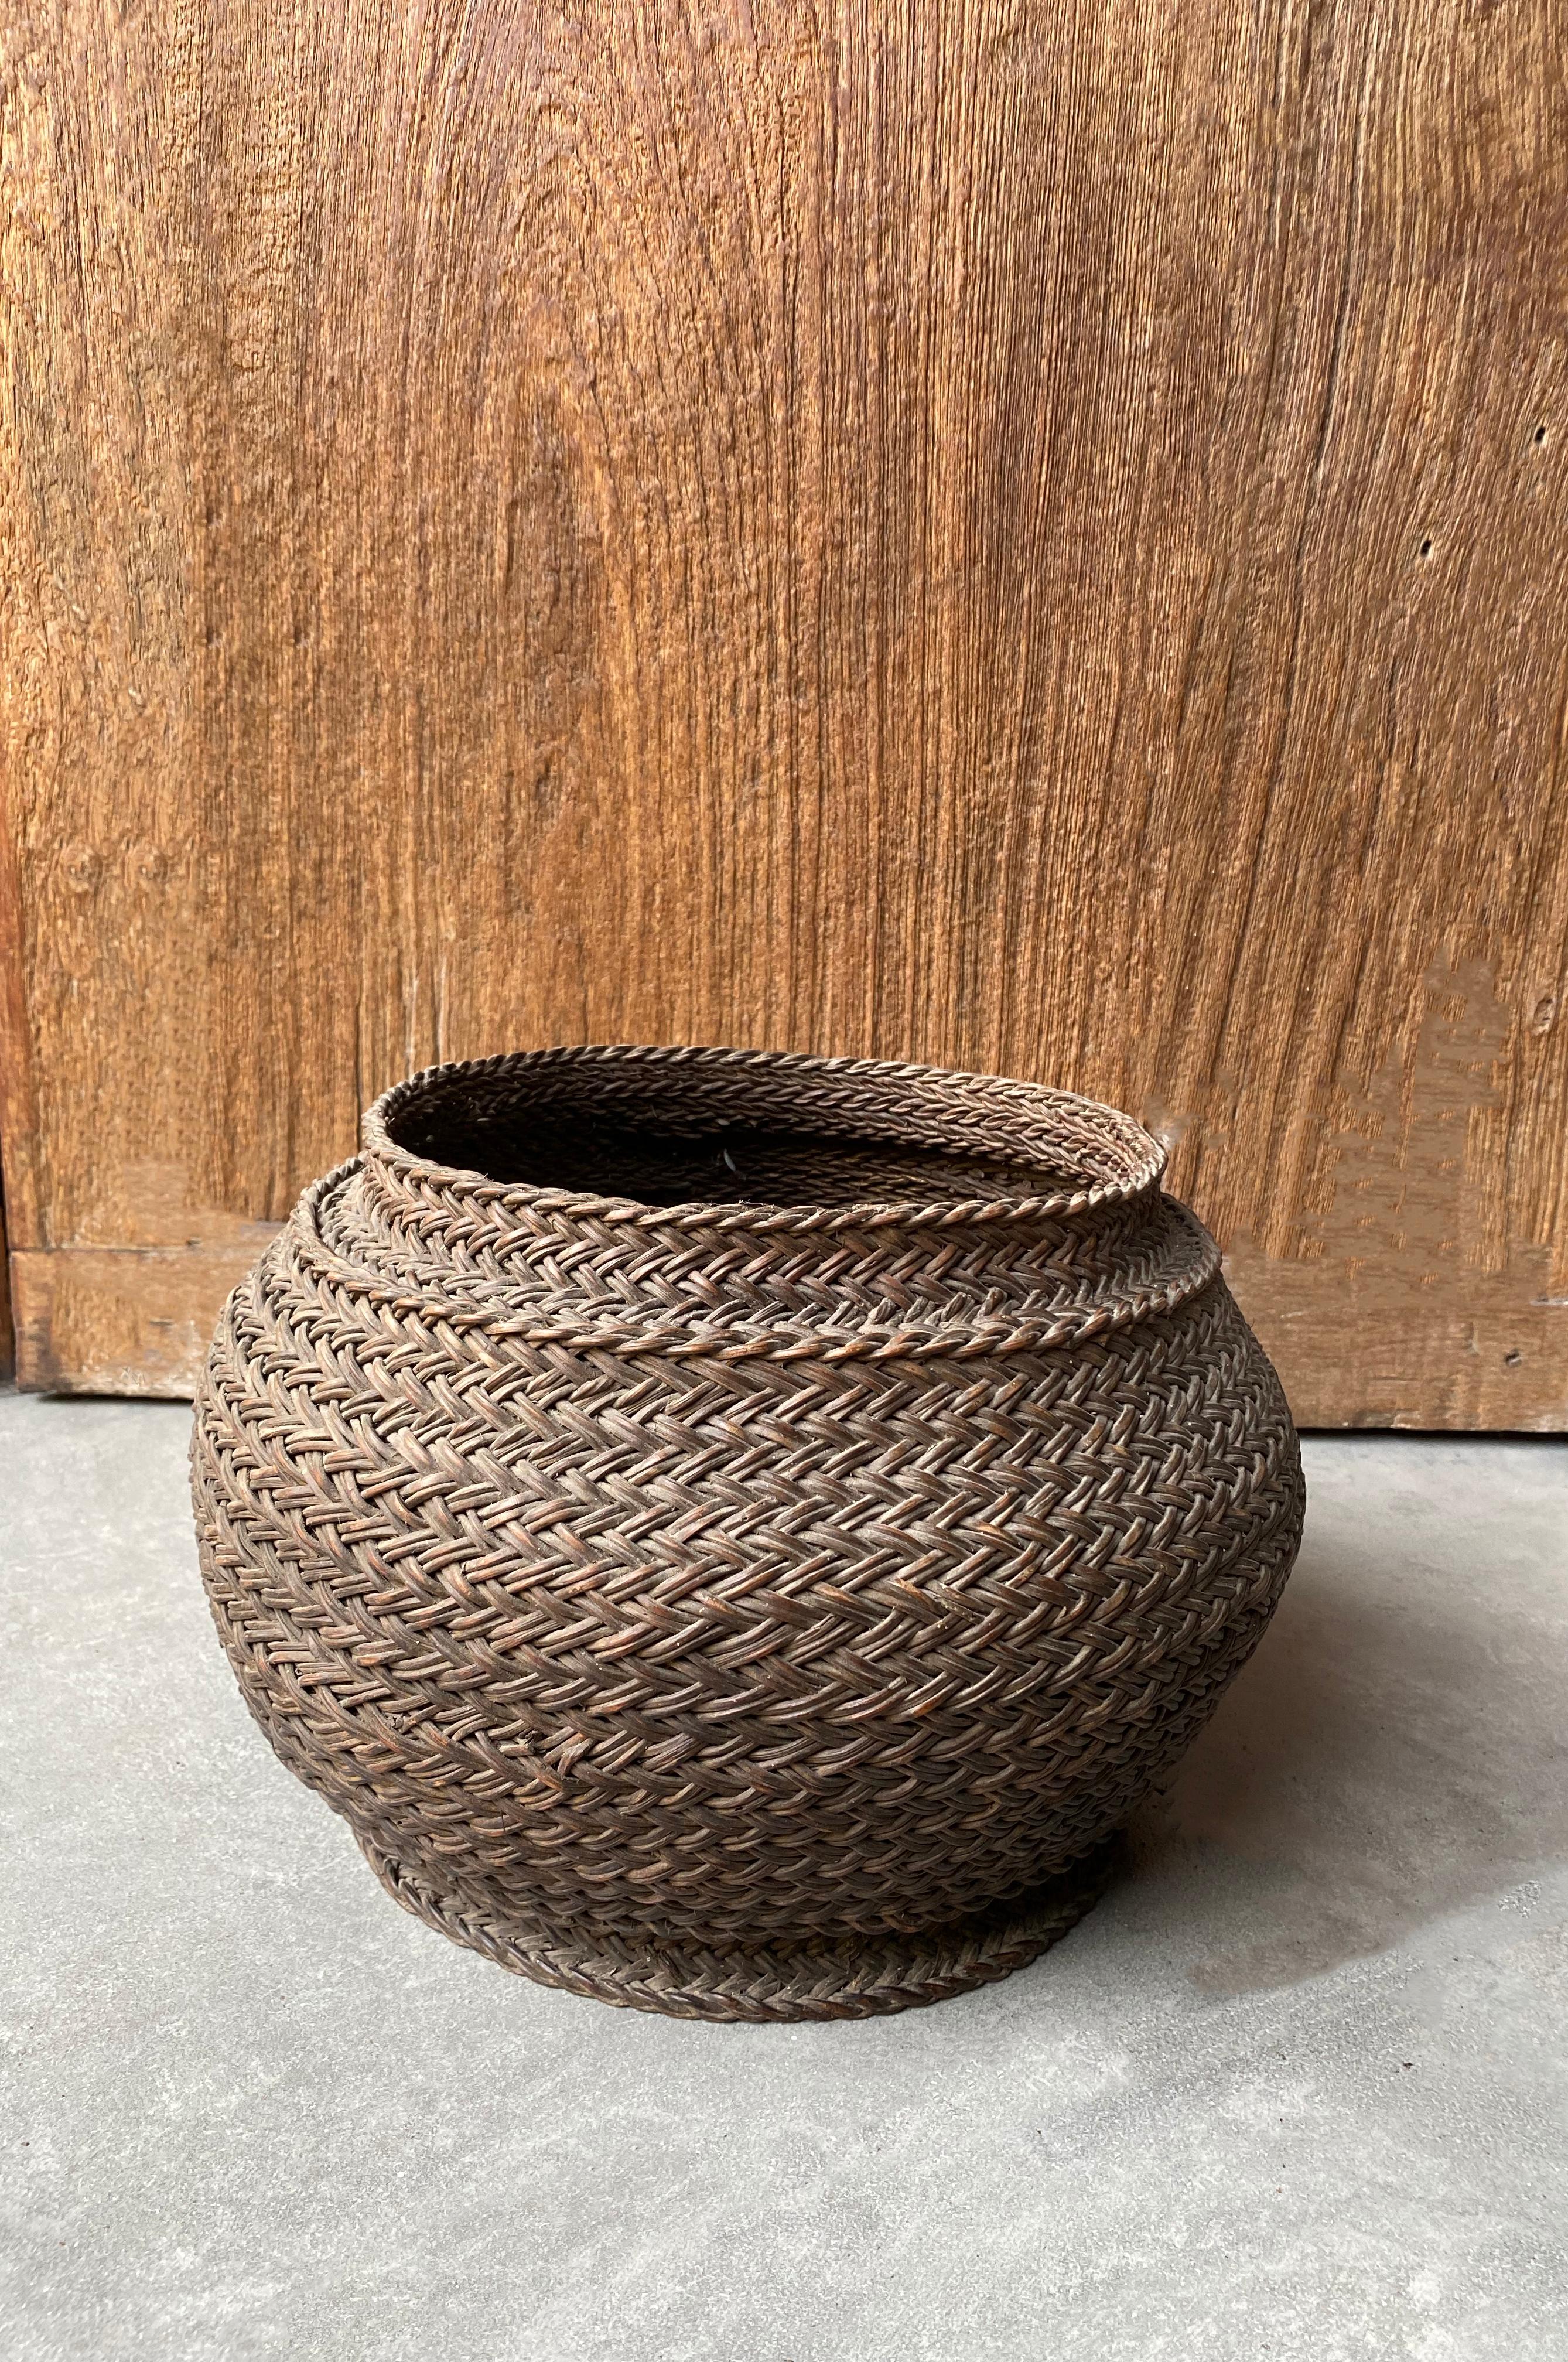 Other Rattan Basket Hand-Woven from Toraja People of Sulawesi, Mid 20th Century